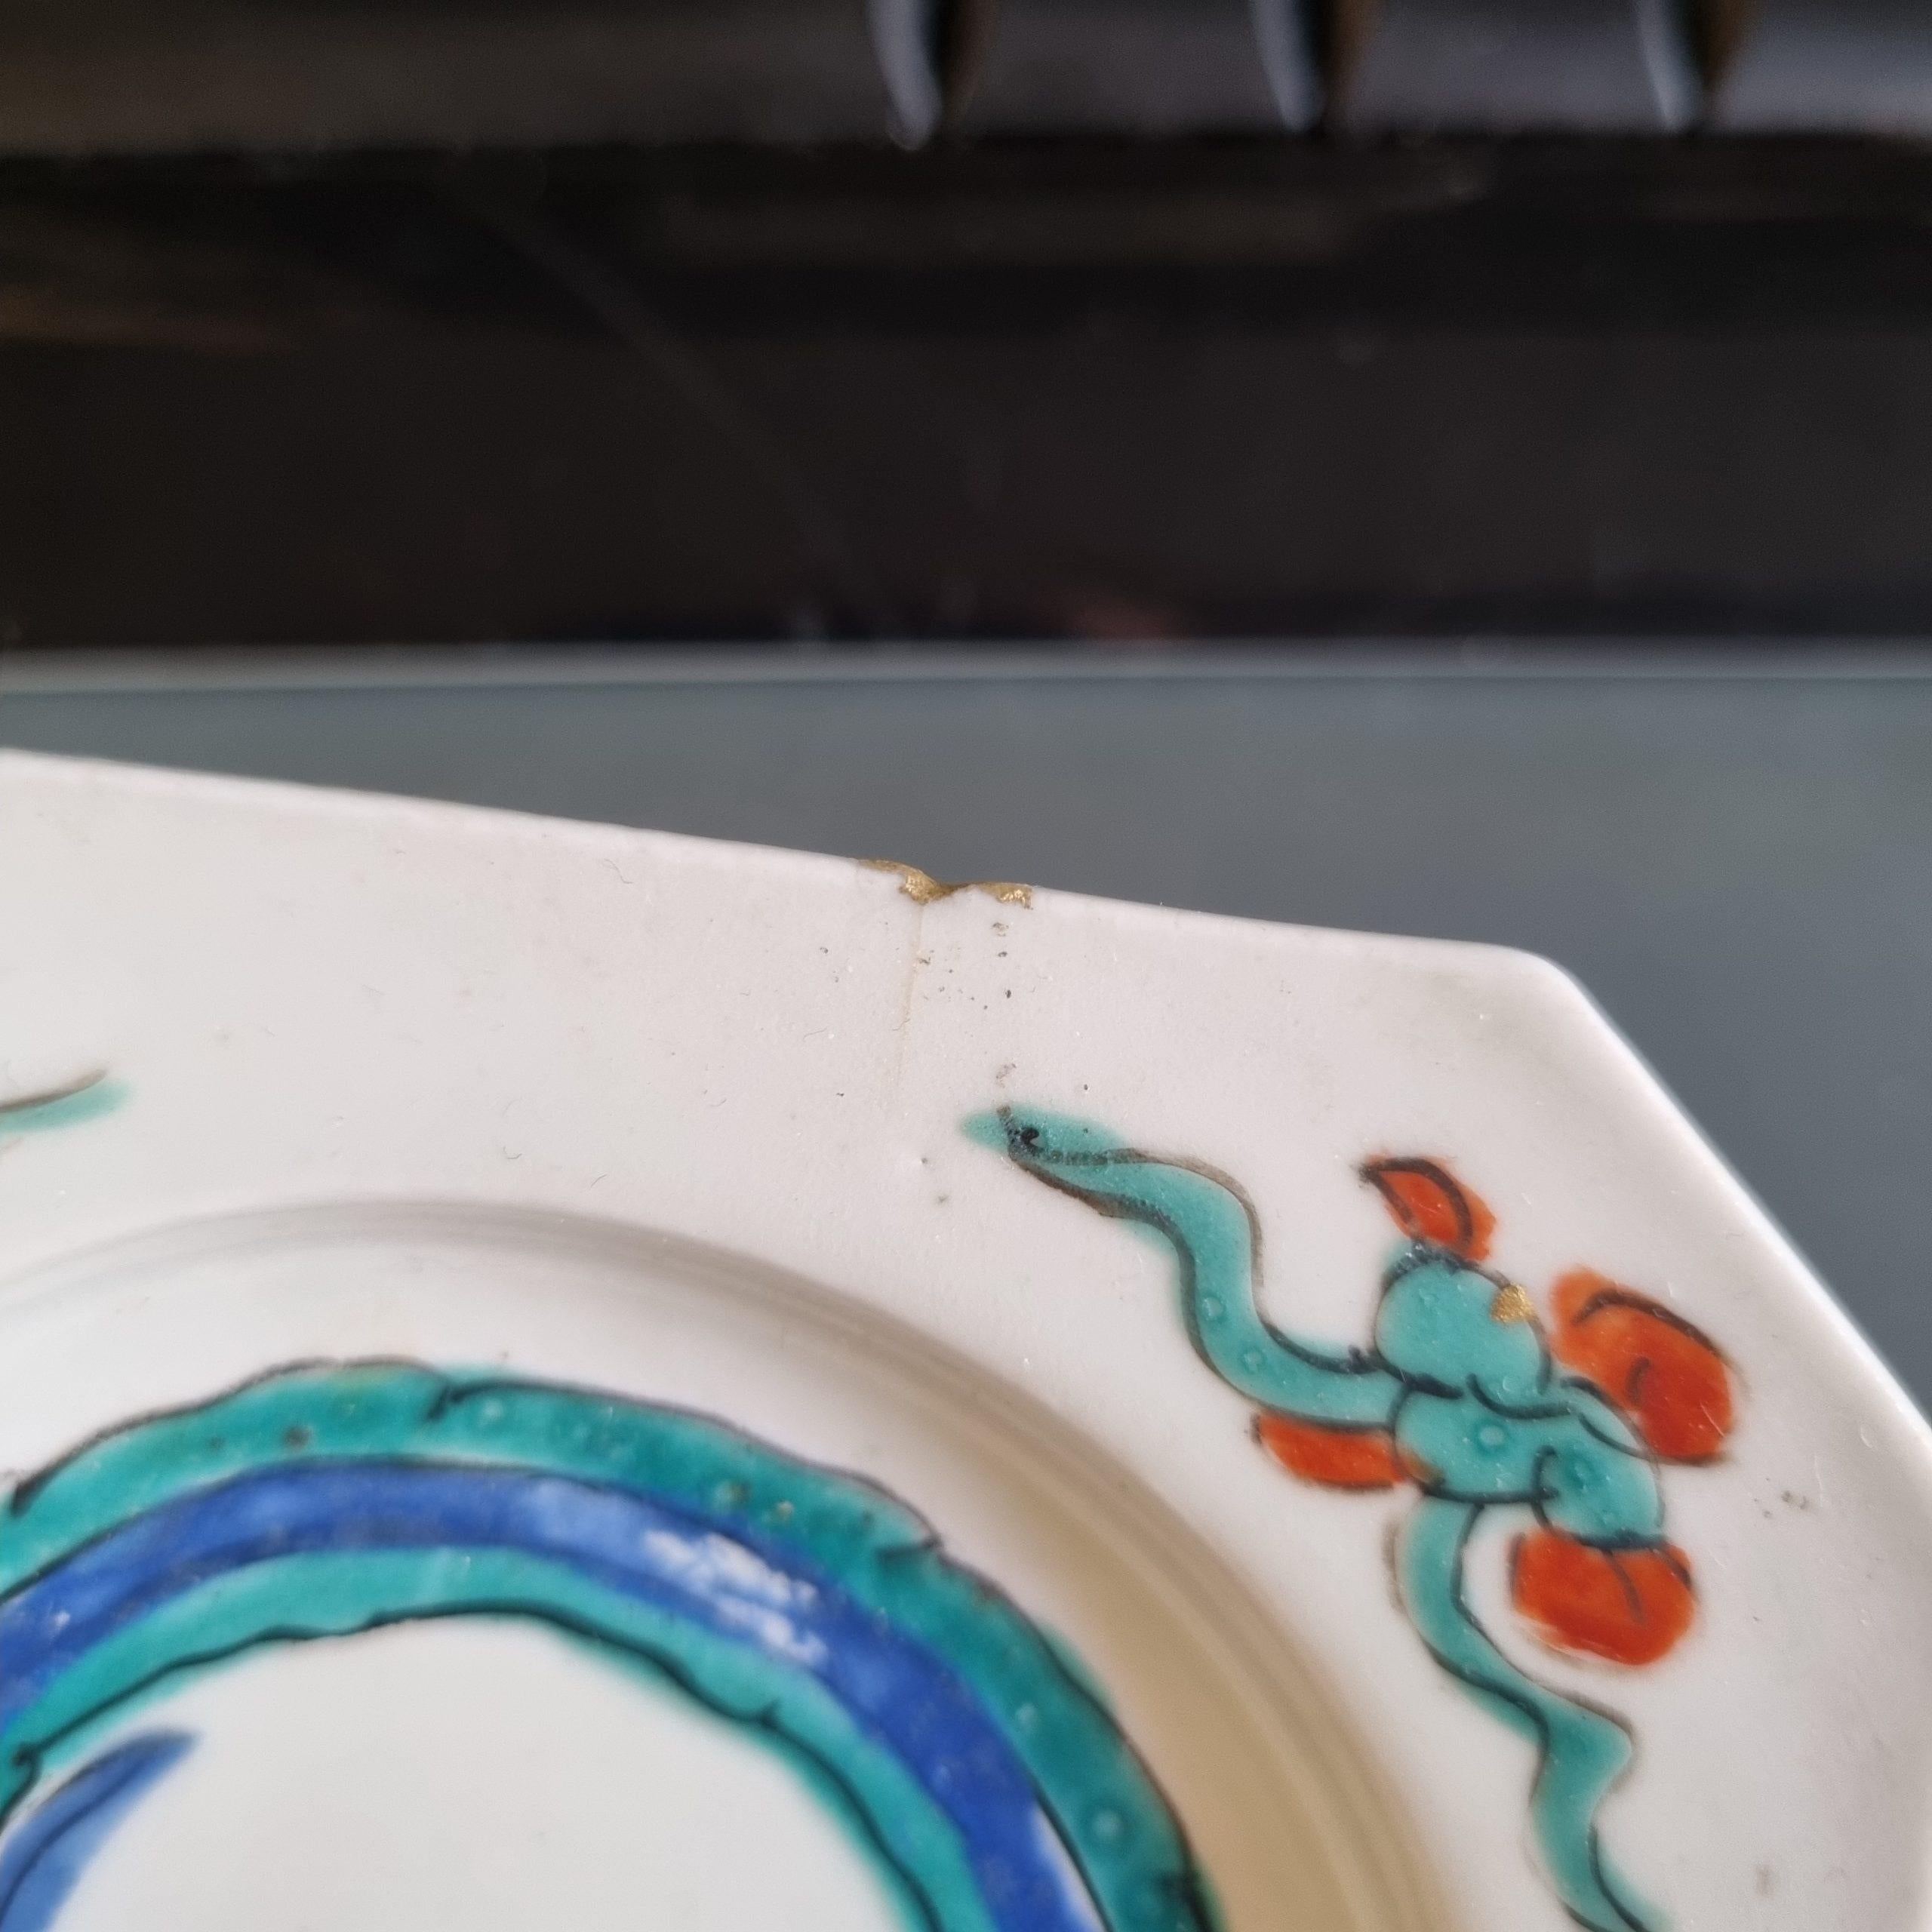 Description
Sharing this lovely little dish from the second half of the 17th century.
It is an Early Japanese Enamel Decorated Saucer c.1660-1680.
It is sometimes described as early Kakiemon or early Kutani, Dr.Oliver Impey describes this type as